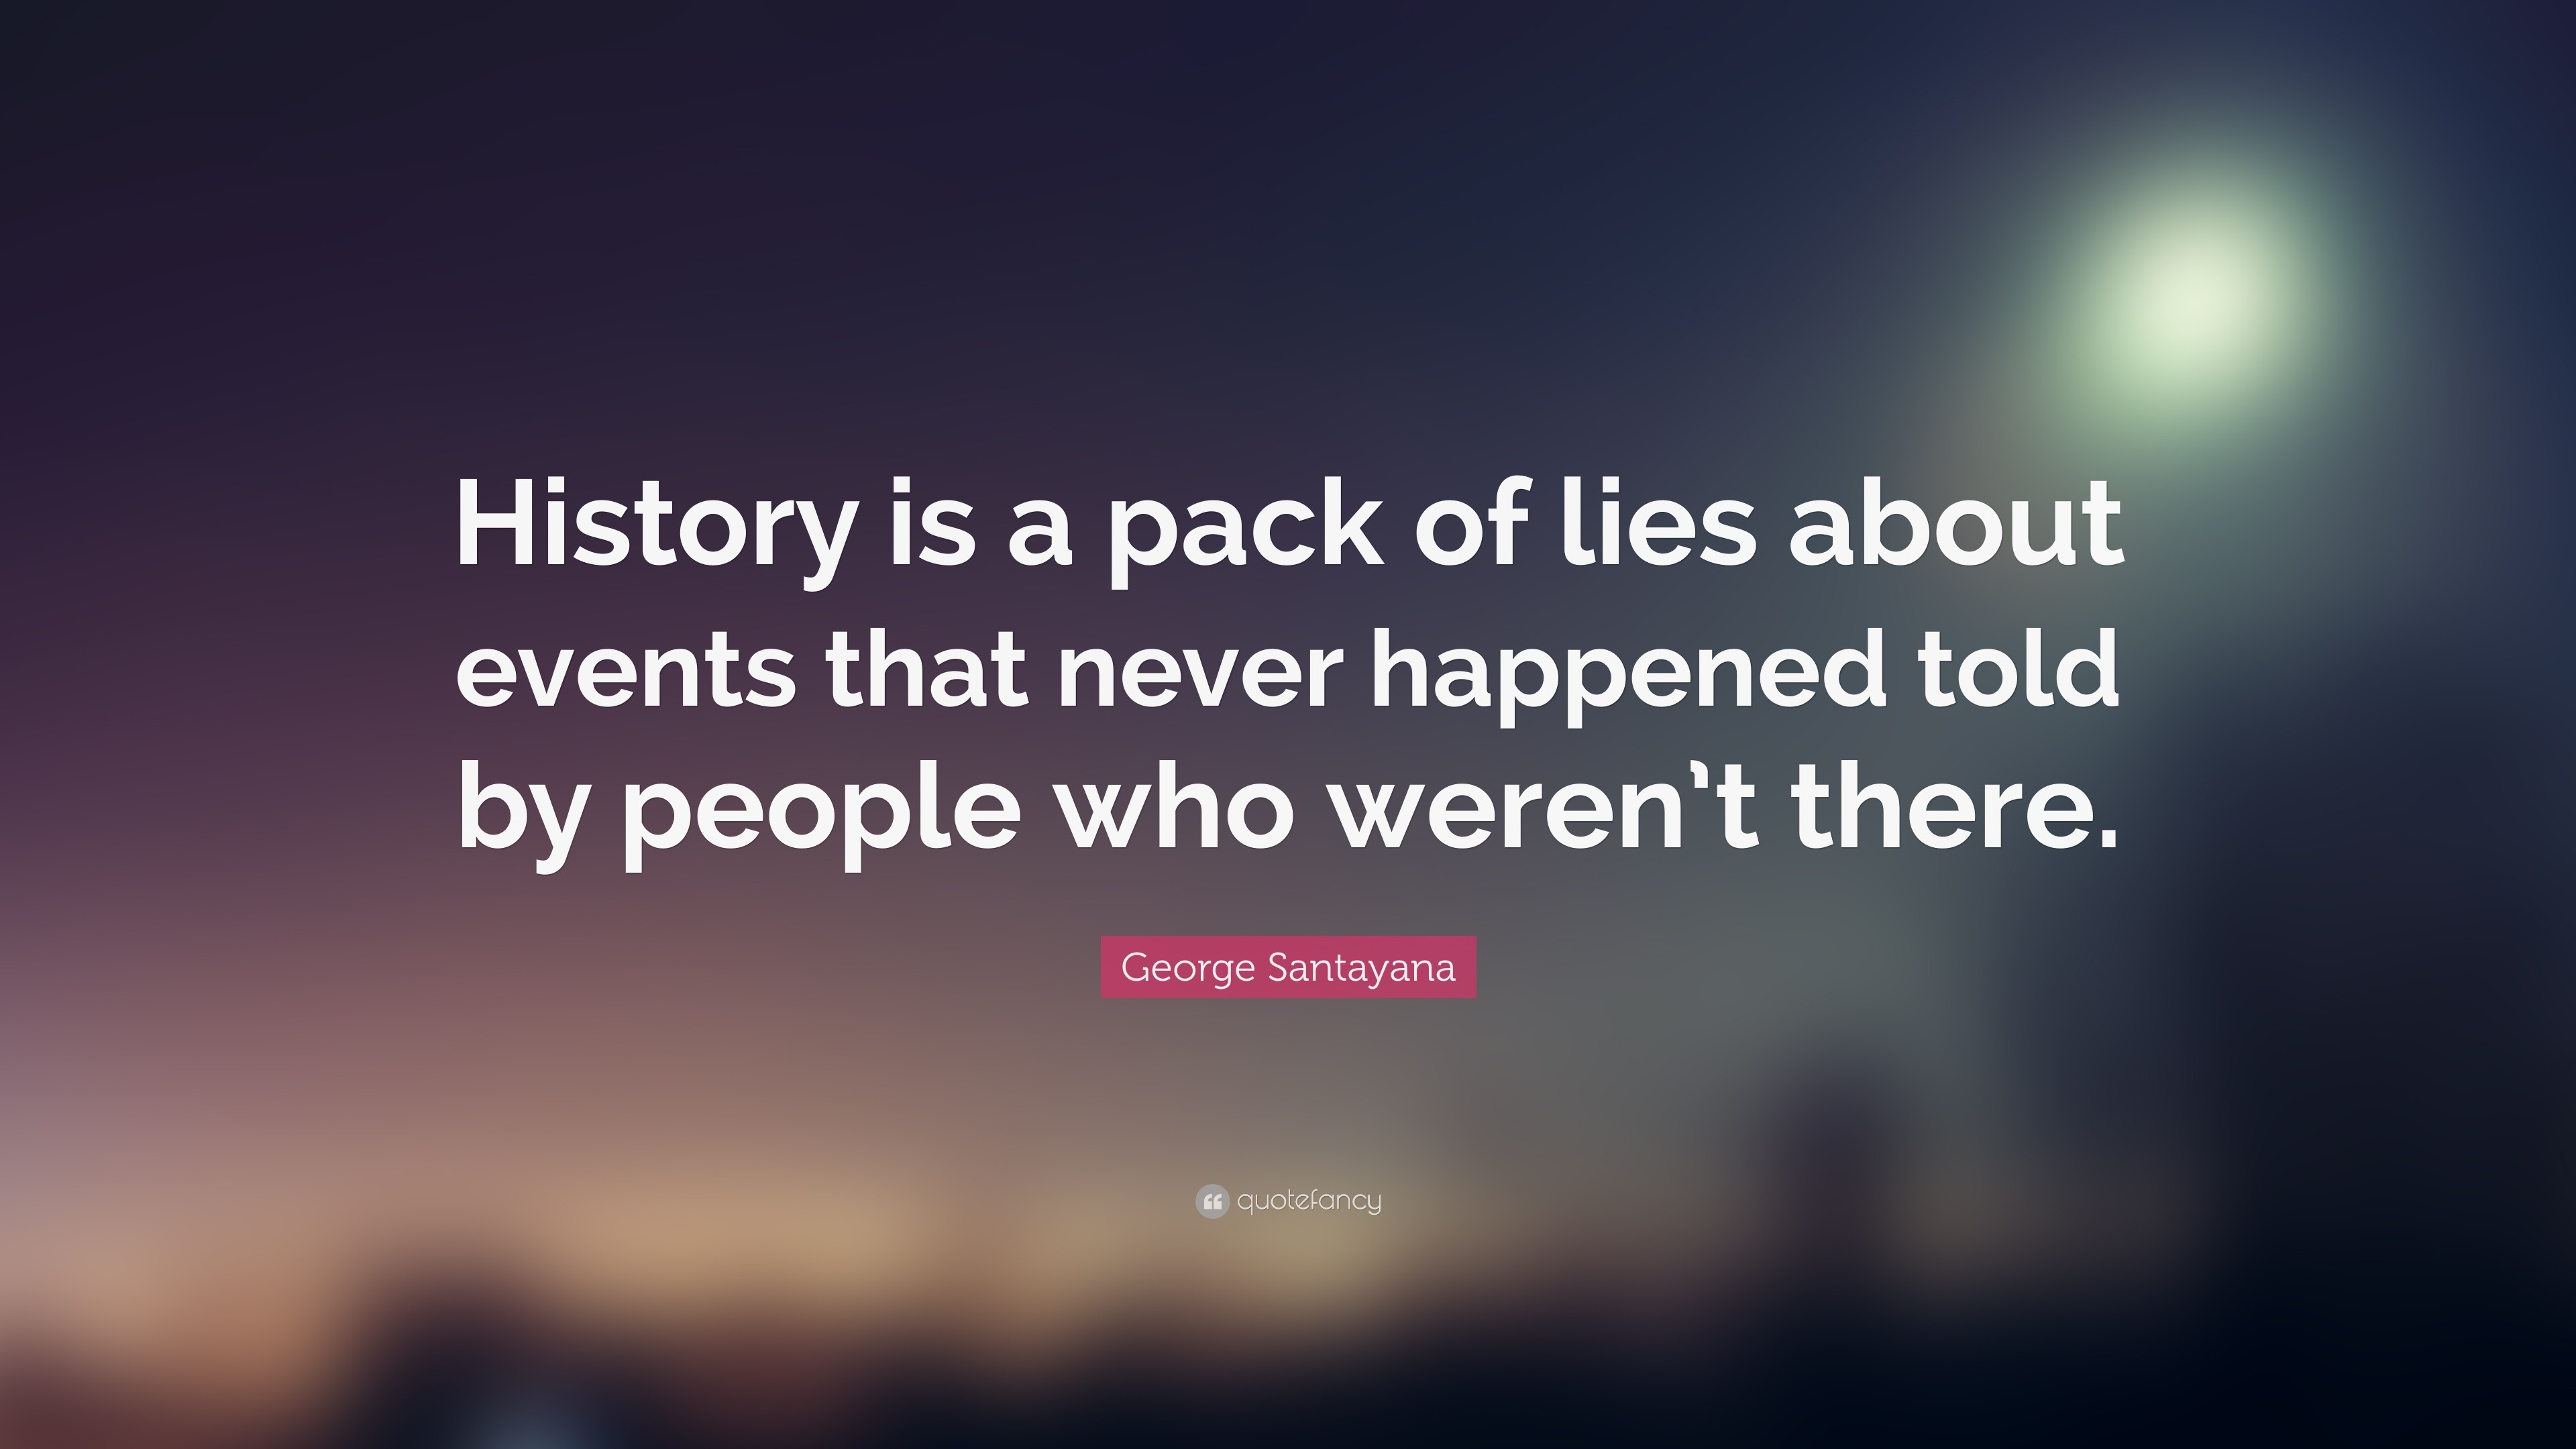 George Santayana Quote: “History is a pack of lies about events that never  happened told by people who weren't there.” (7 wallpapers) - Quotefancy